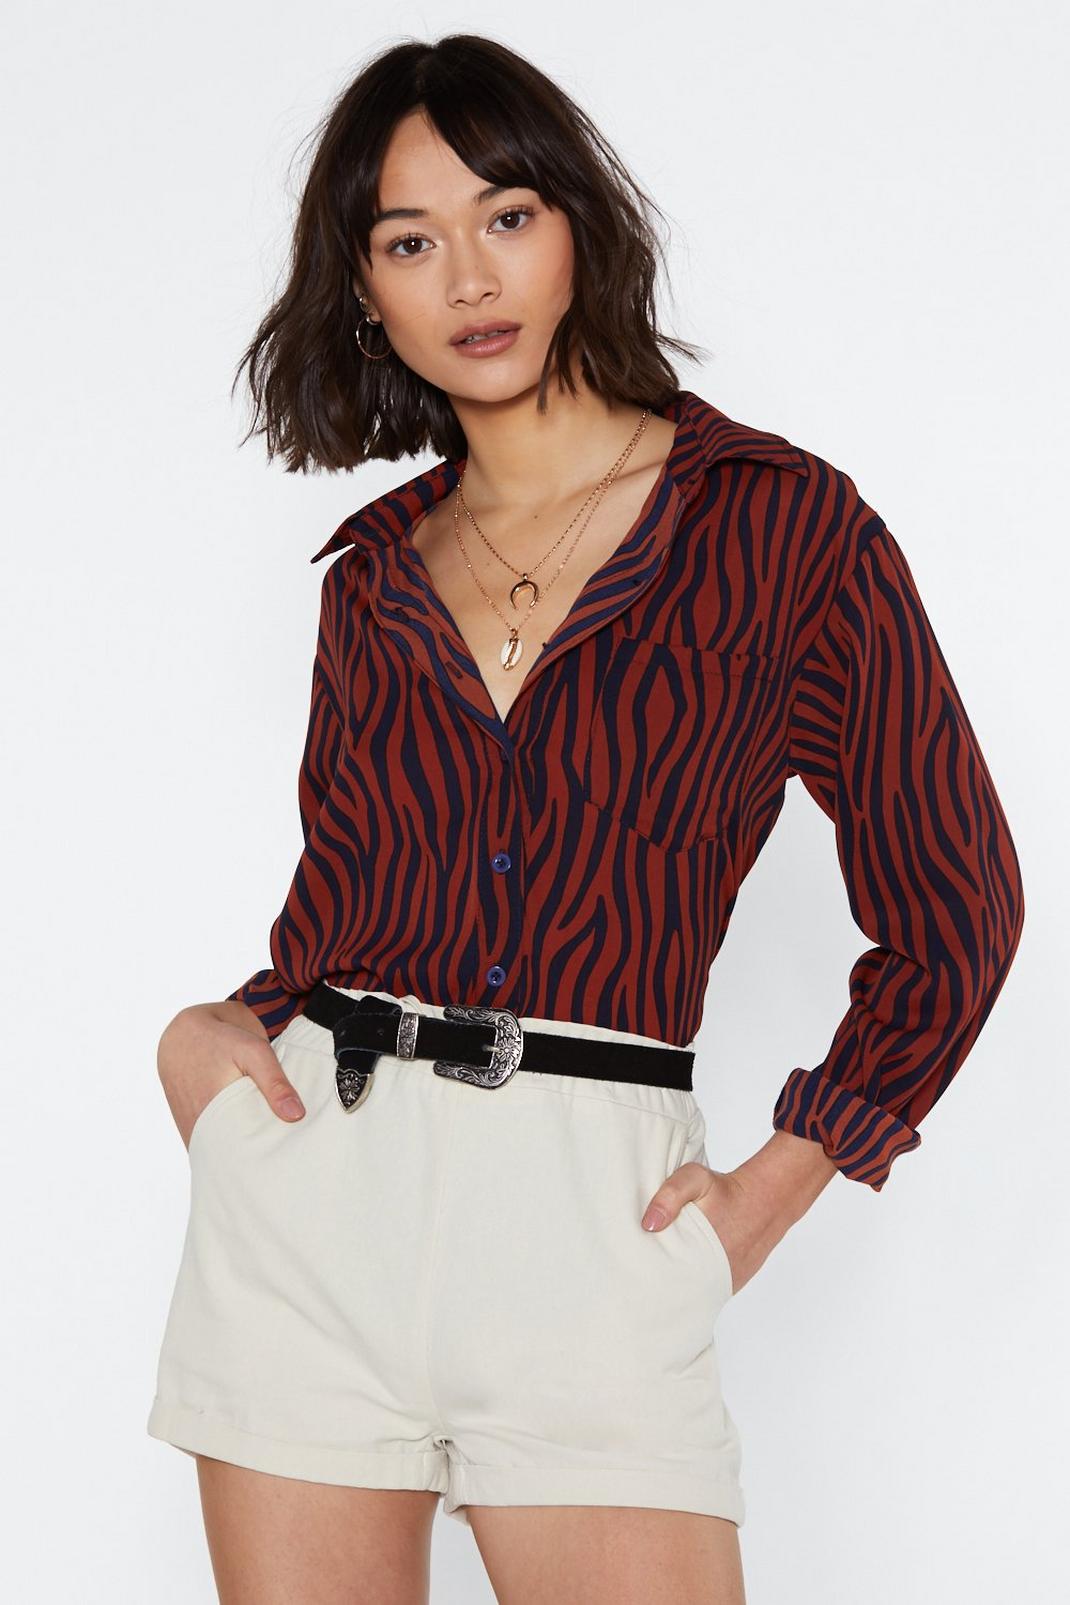 Herd So Much About You Zebra Relaxed Shirt image number 1